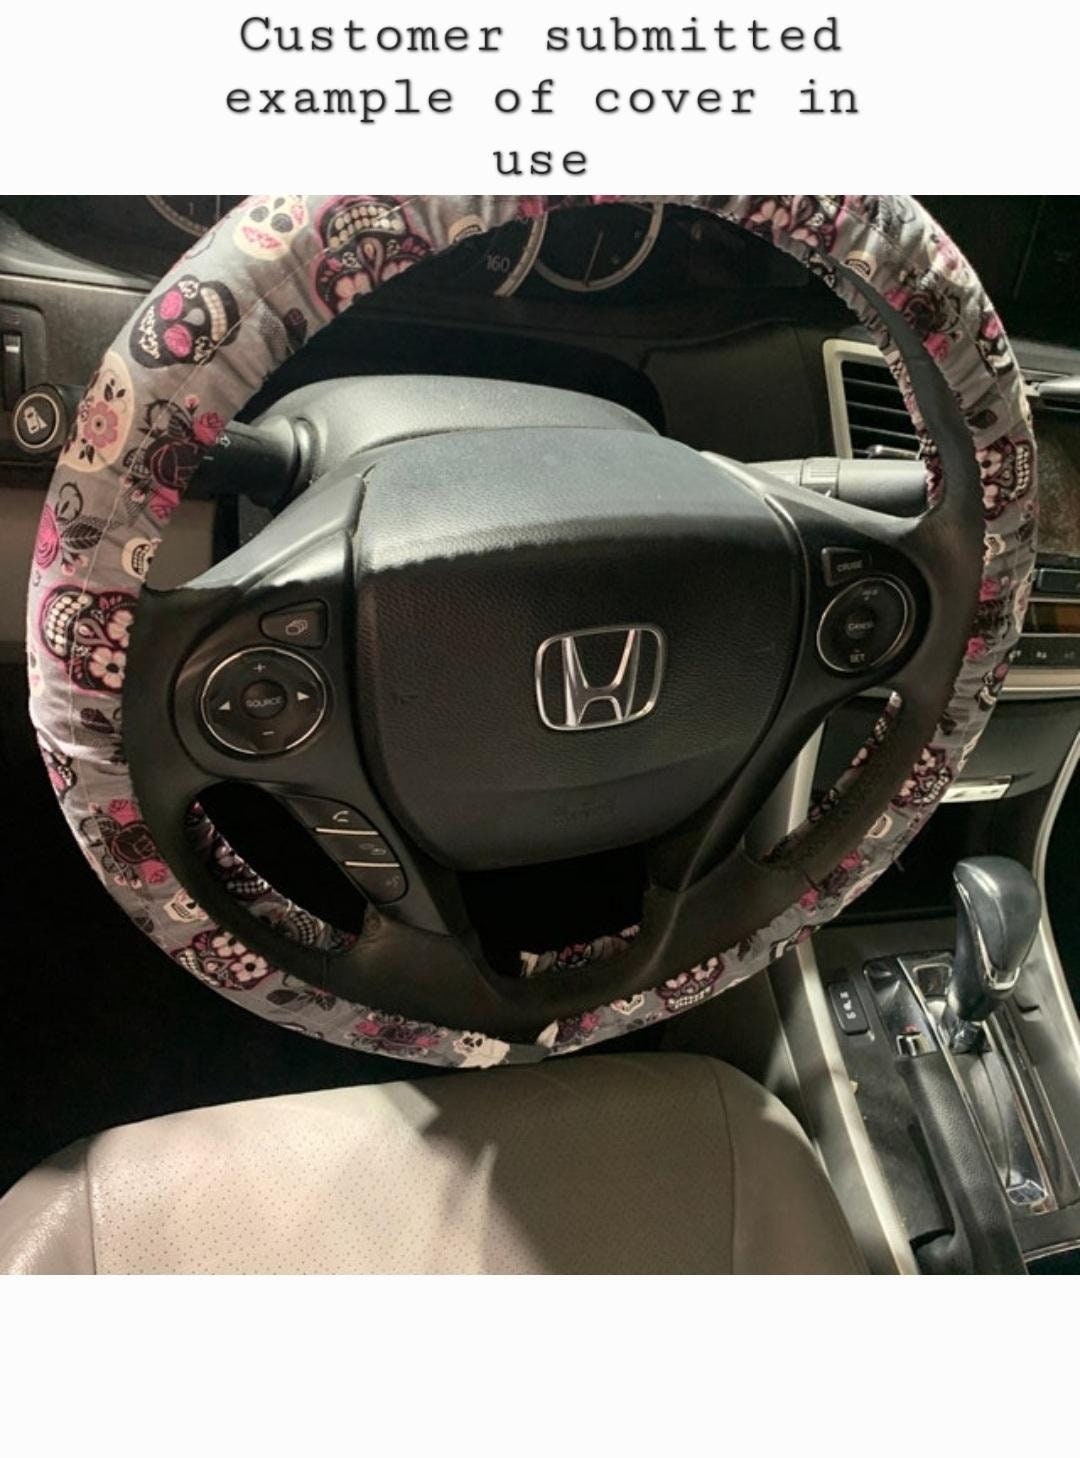 Floral Steering Wheel Cover, 100% Cotton, Washable, Custom Car Accessories - Harlow's Store and Garden Gifts